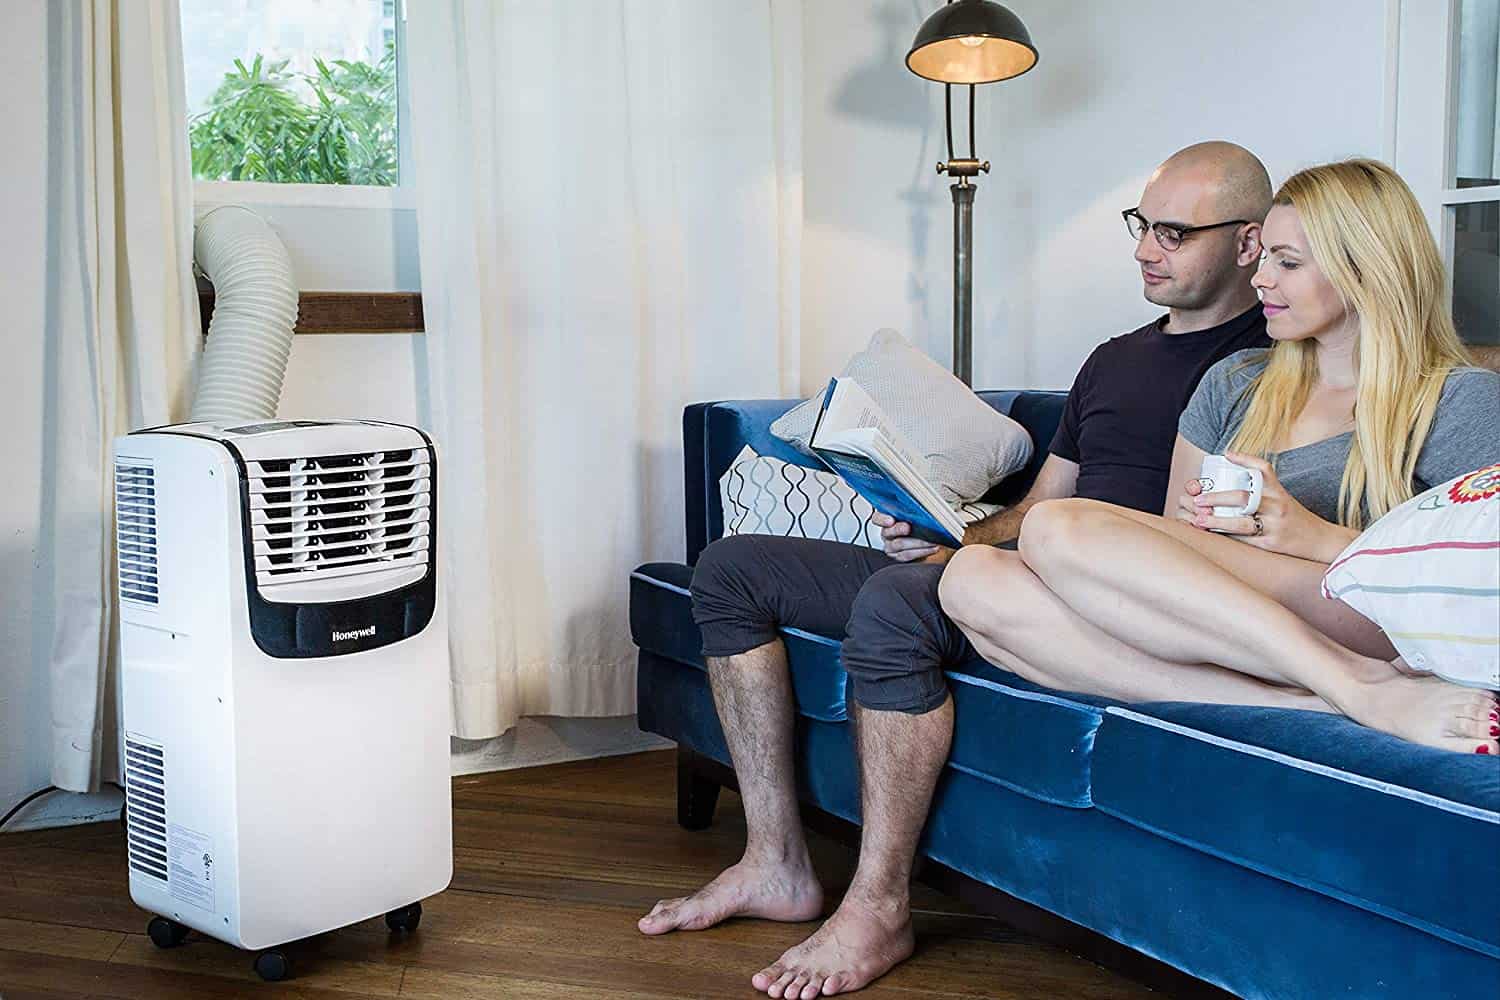 https://indoorbreathing.com/wp-content/uploads/2020/03/Honeywell-MO08CESWK-Compact-Portable-Air-Conditioner-Review-2.jpg